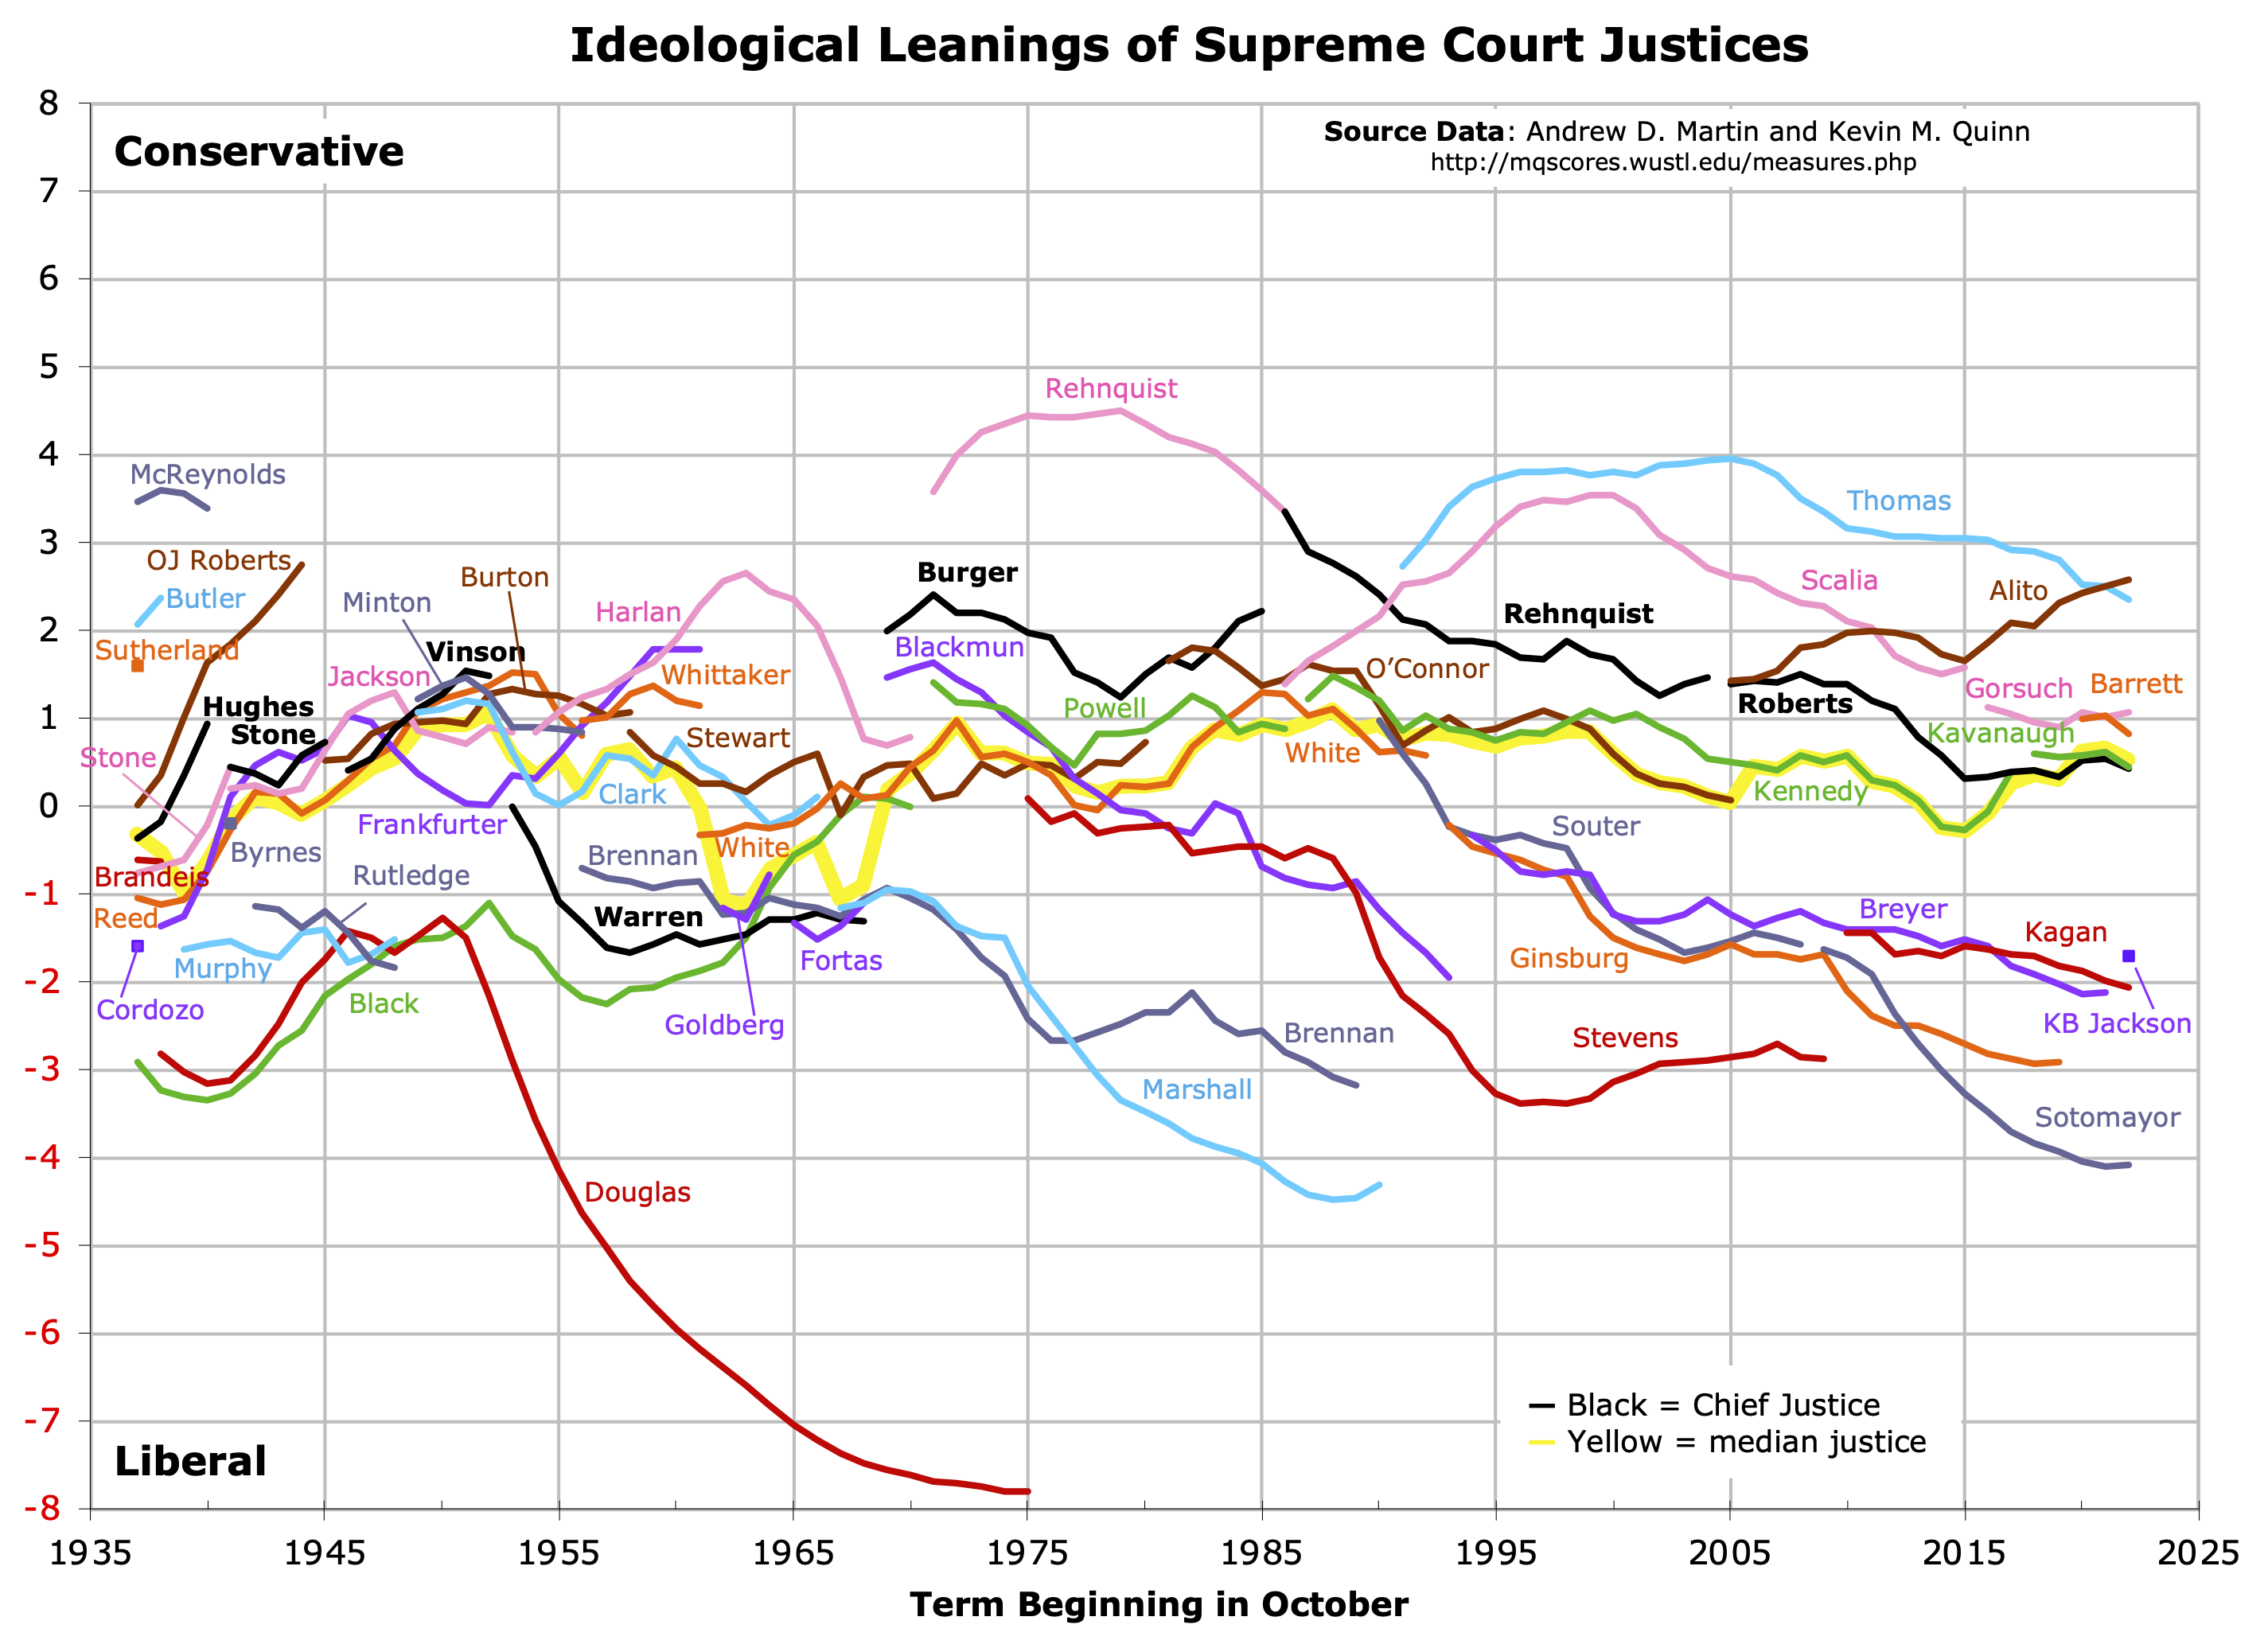 Graph of Martin-Quinn Scores of Supreme Court Justices 1937-Now.png